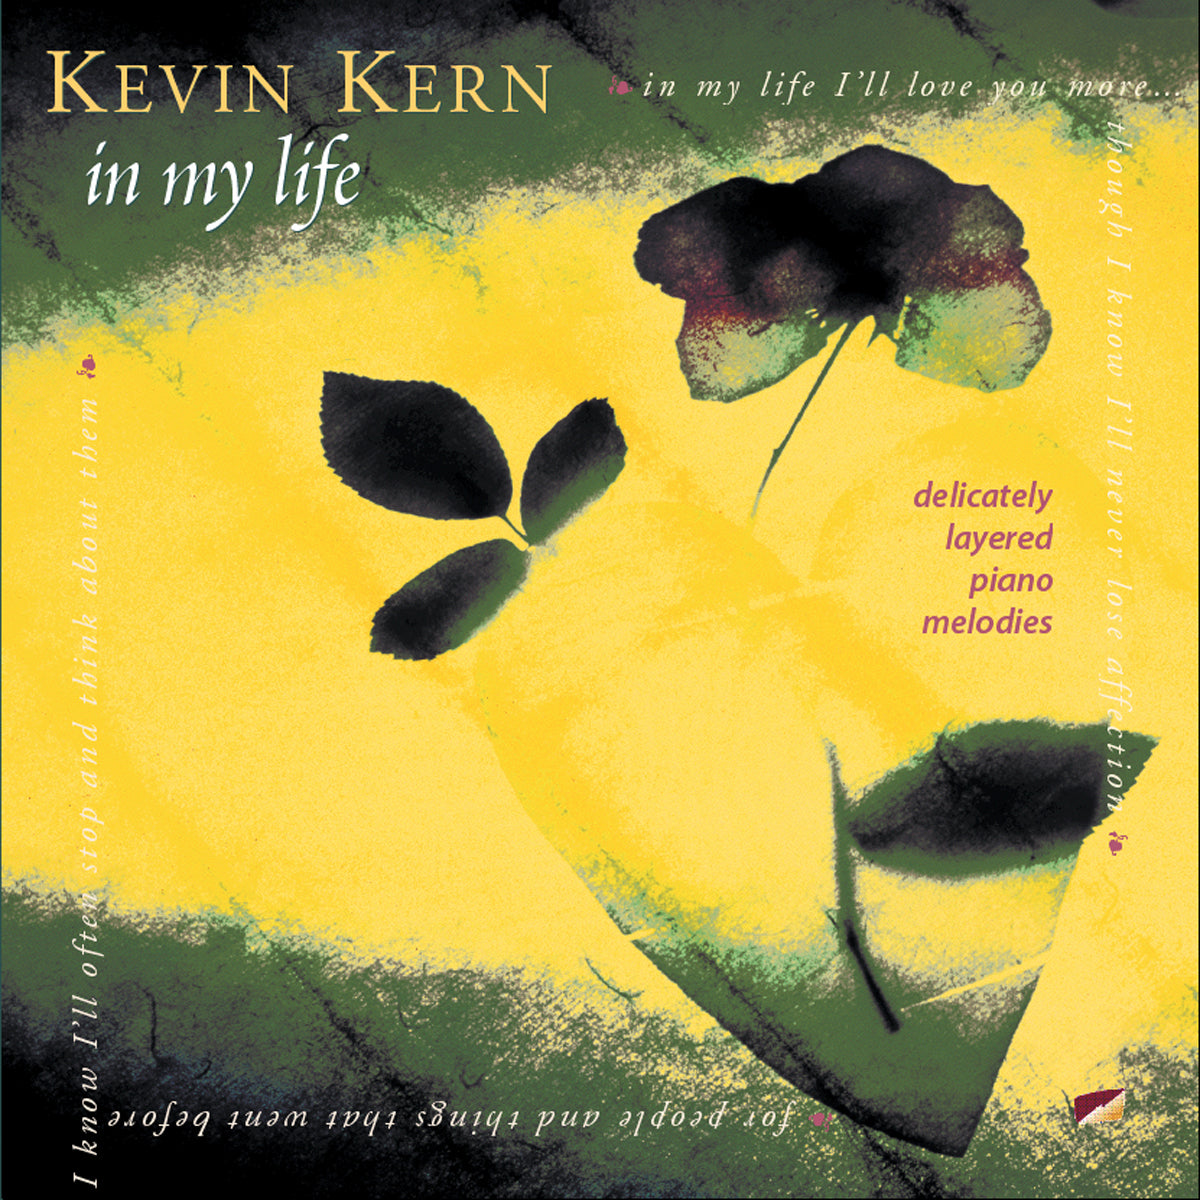 In My Life by Kevin Kern, cd cover art.